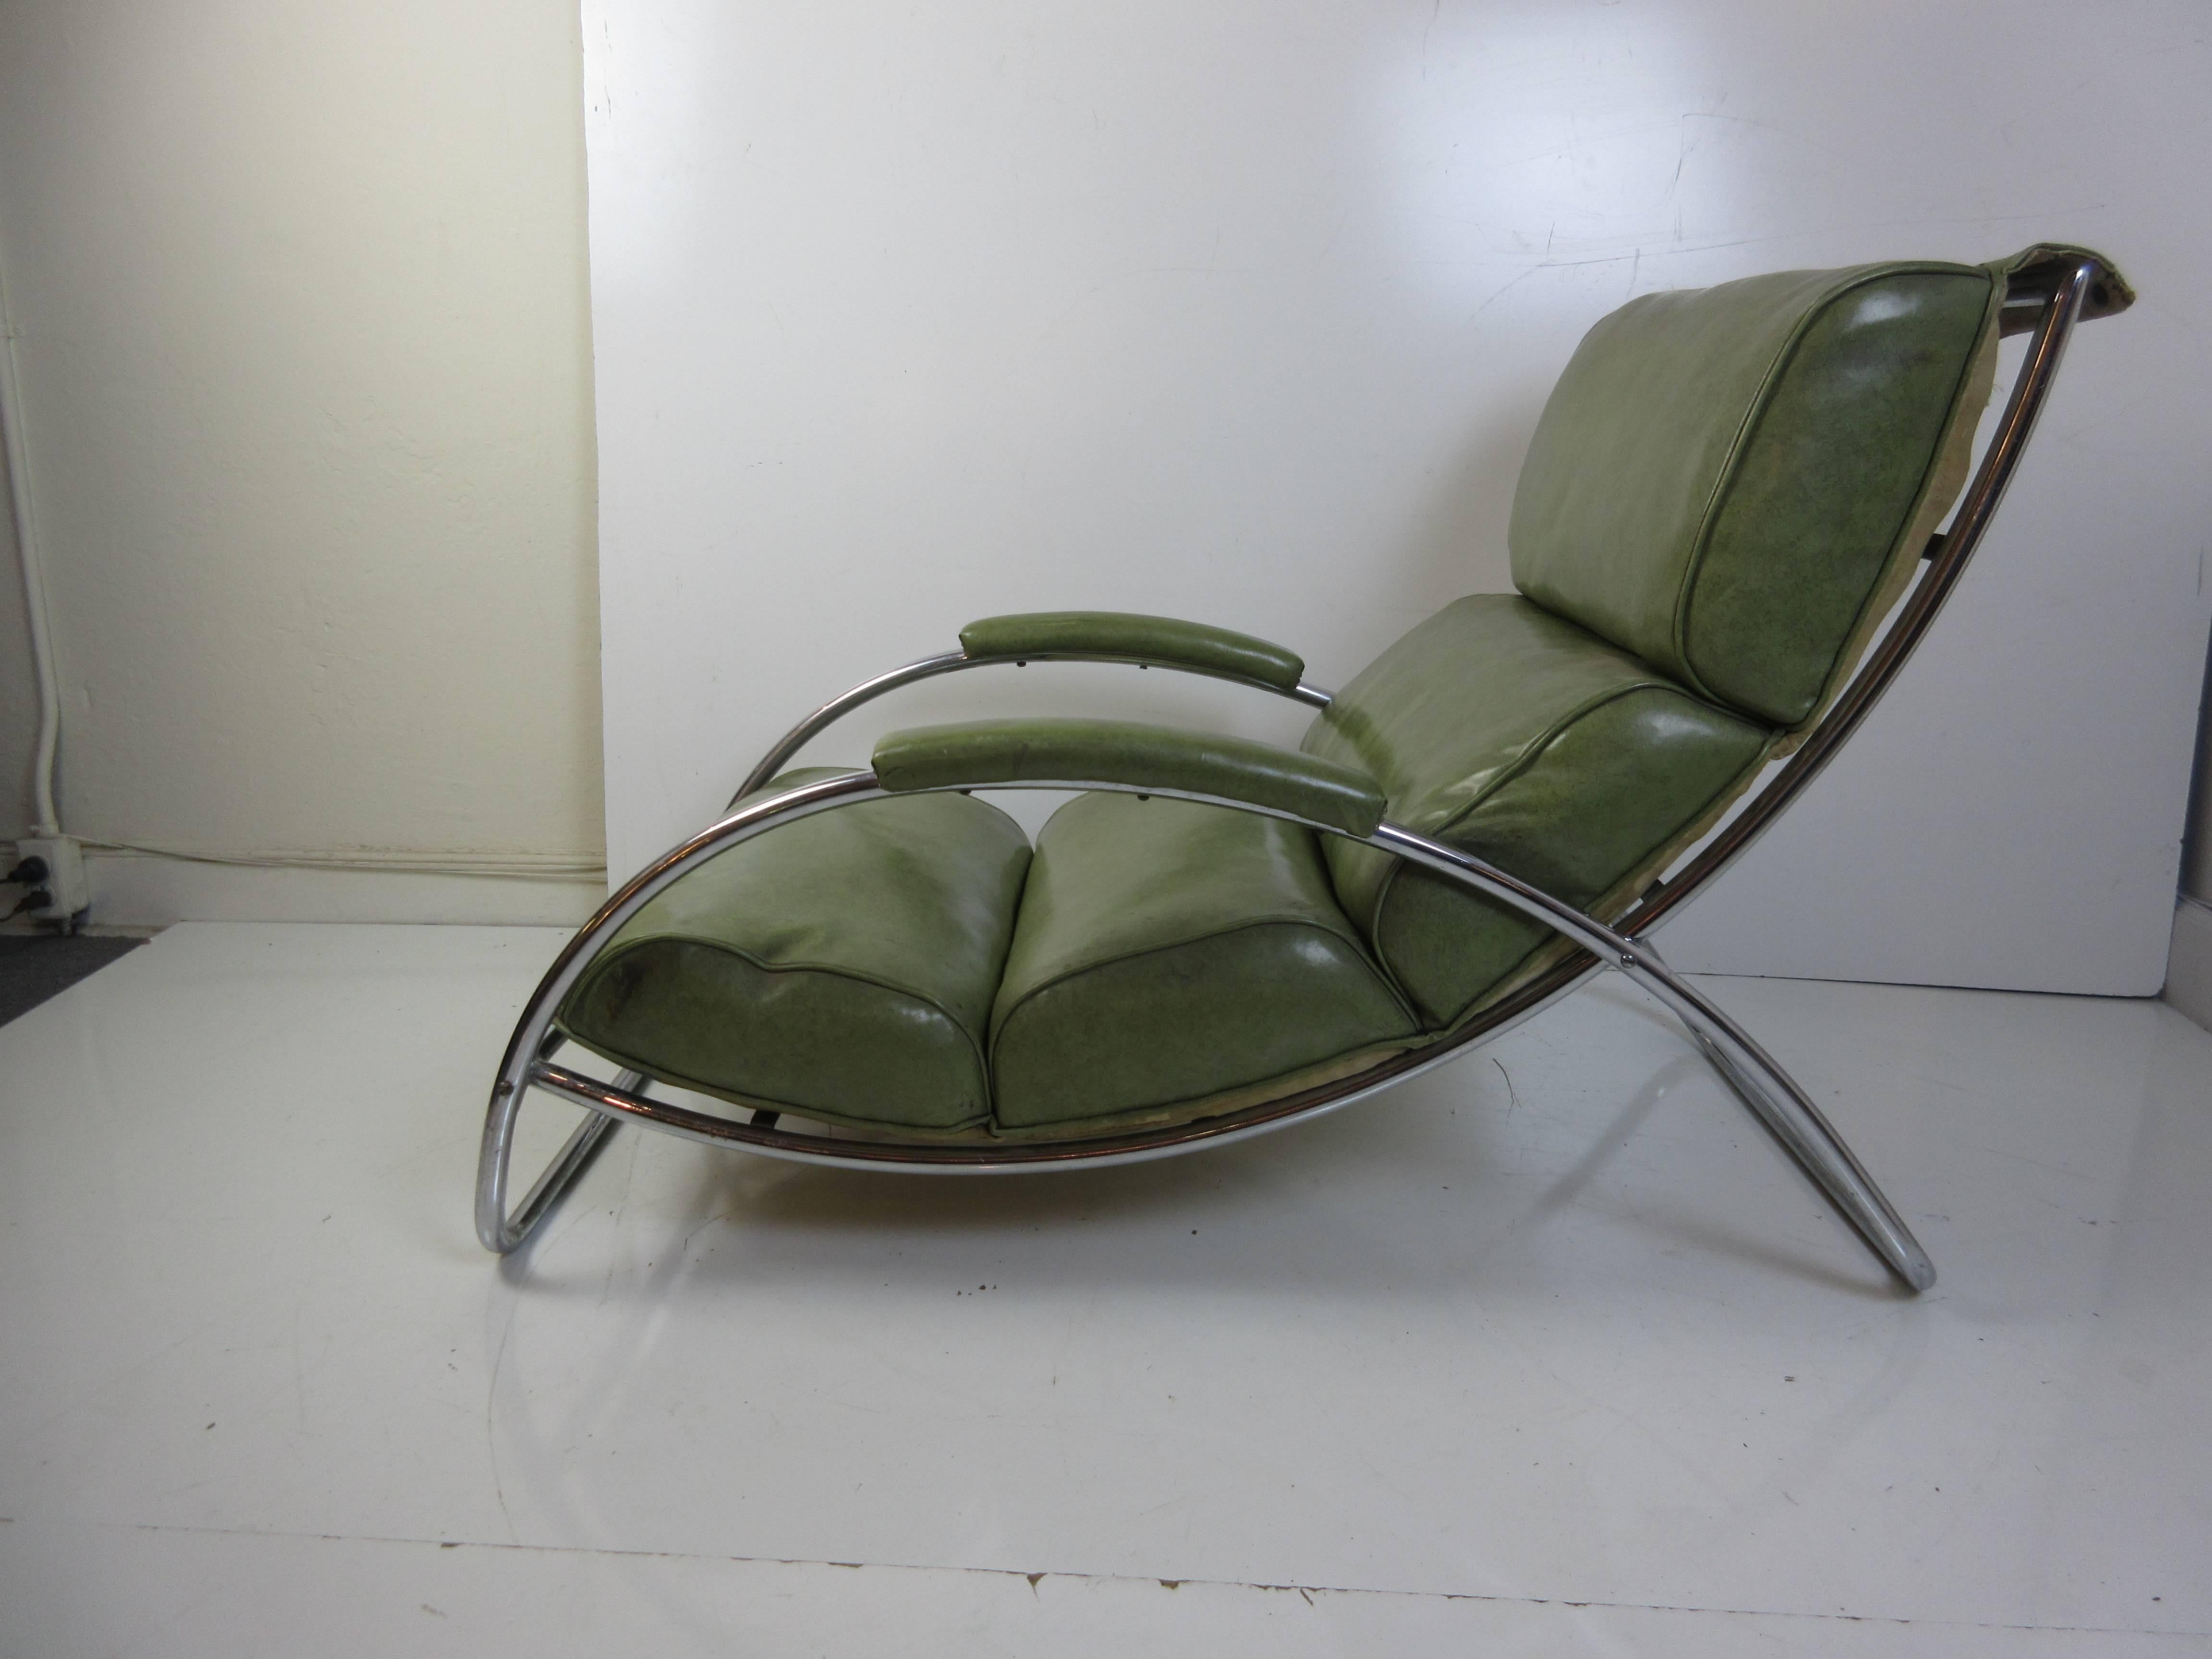 Truly a rare chair designed by Gilbert Rohde for Troy Sunshade. Pictured in the 1934 catalog and featured in the steel frame house 